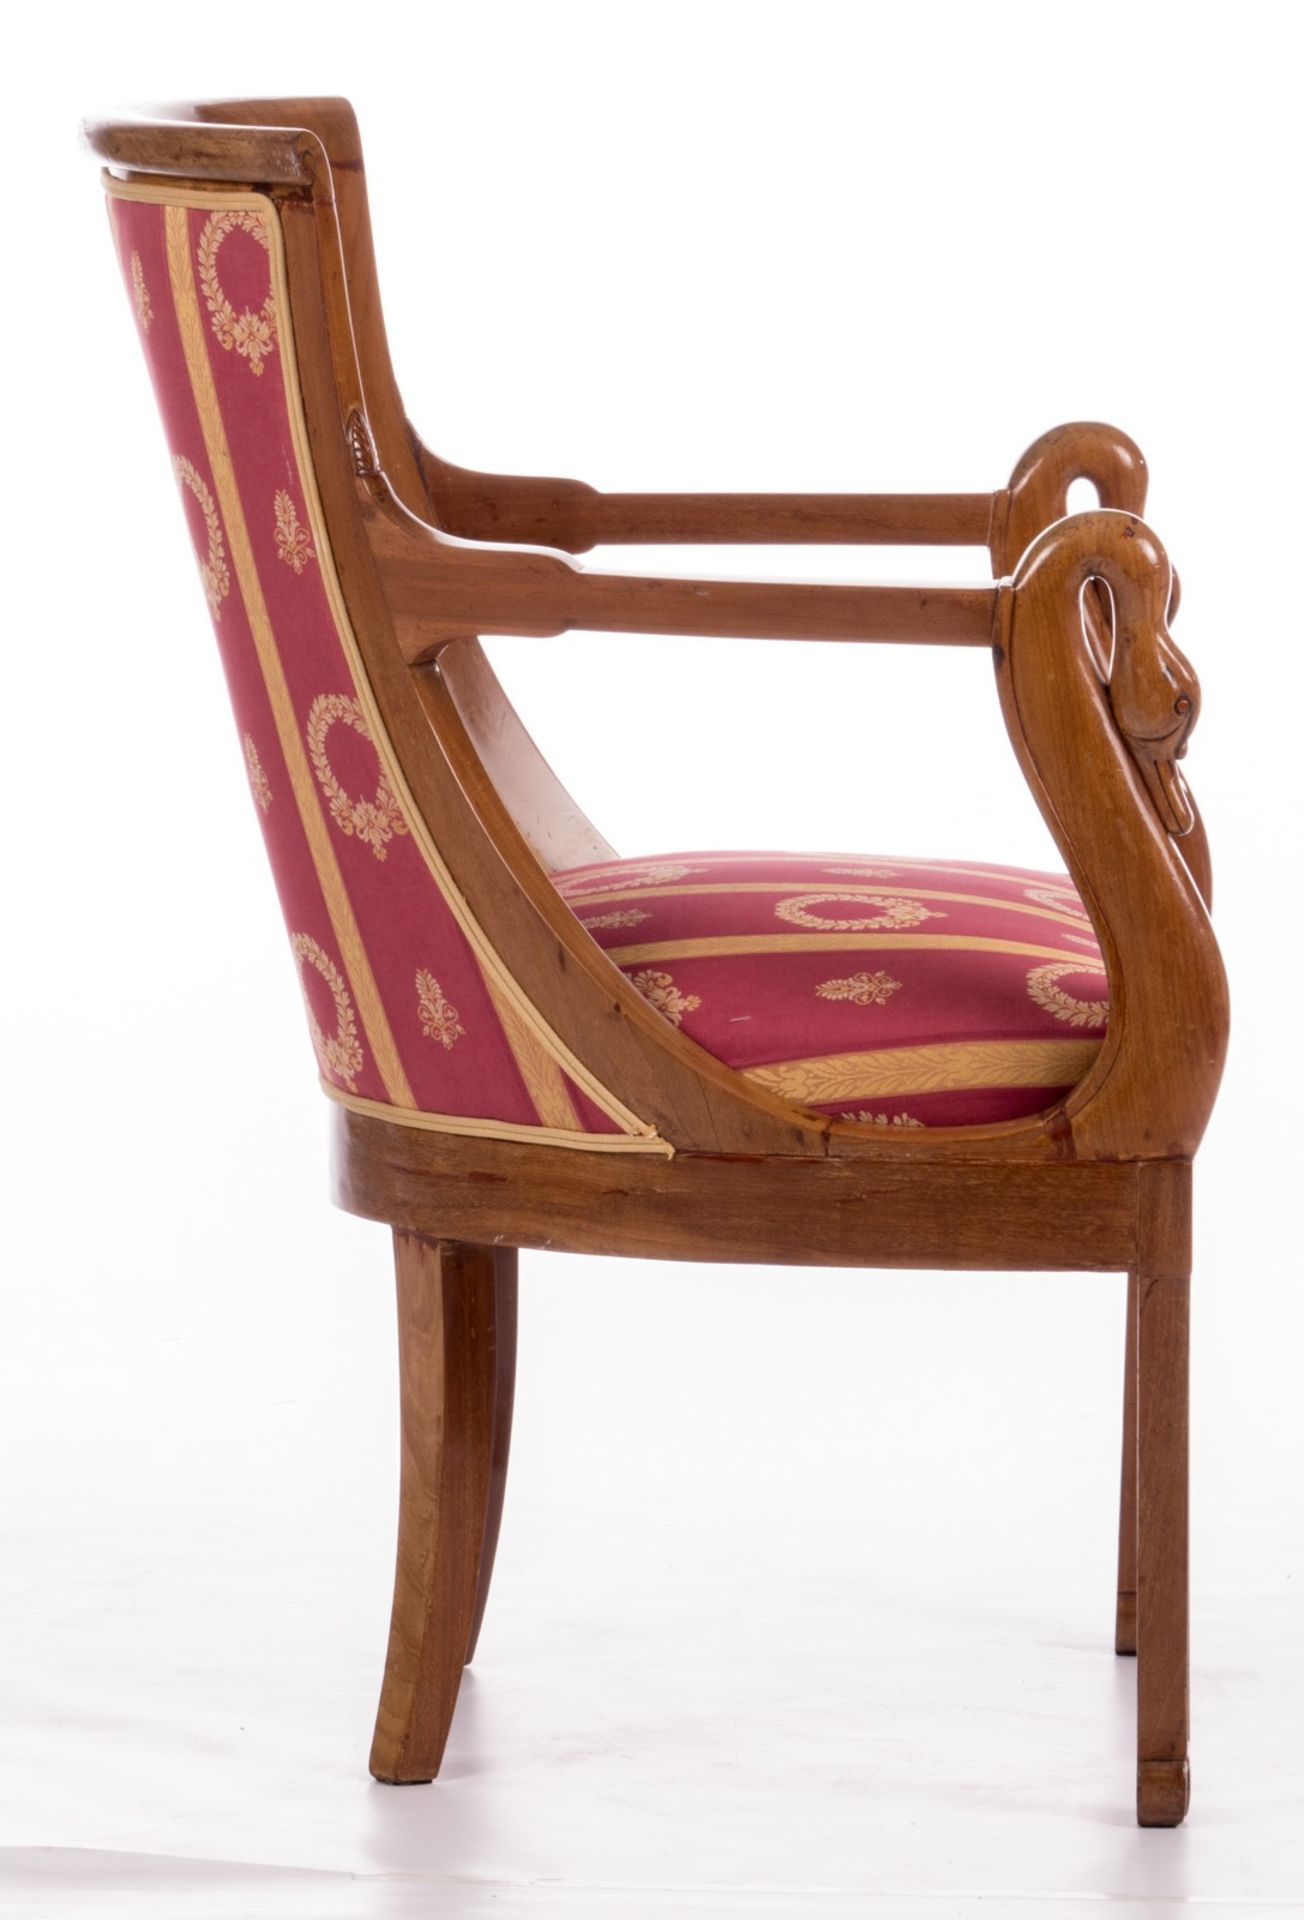 A Neoclassical mahogany armchair en gondole, armrests with swan necks, H 85 - W 58,5 - D 55 cm - Image 5 of 9